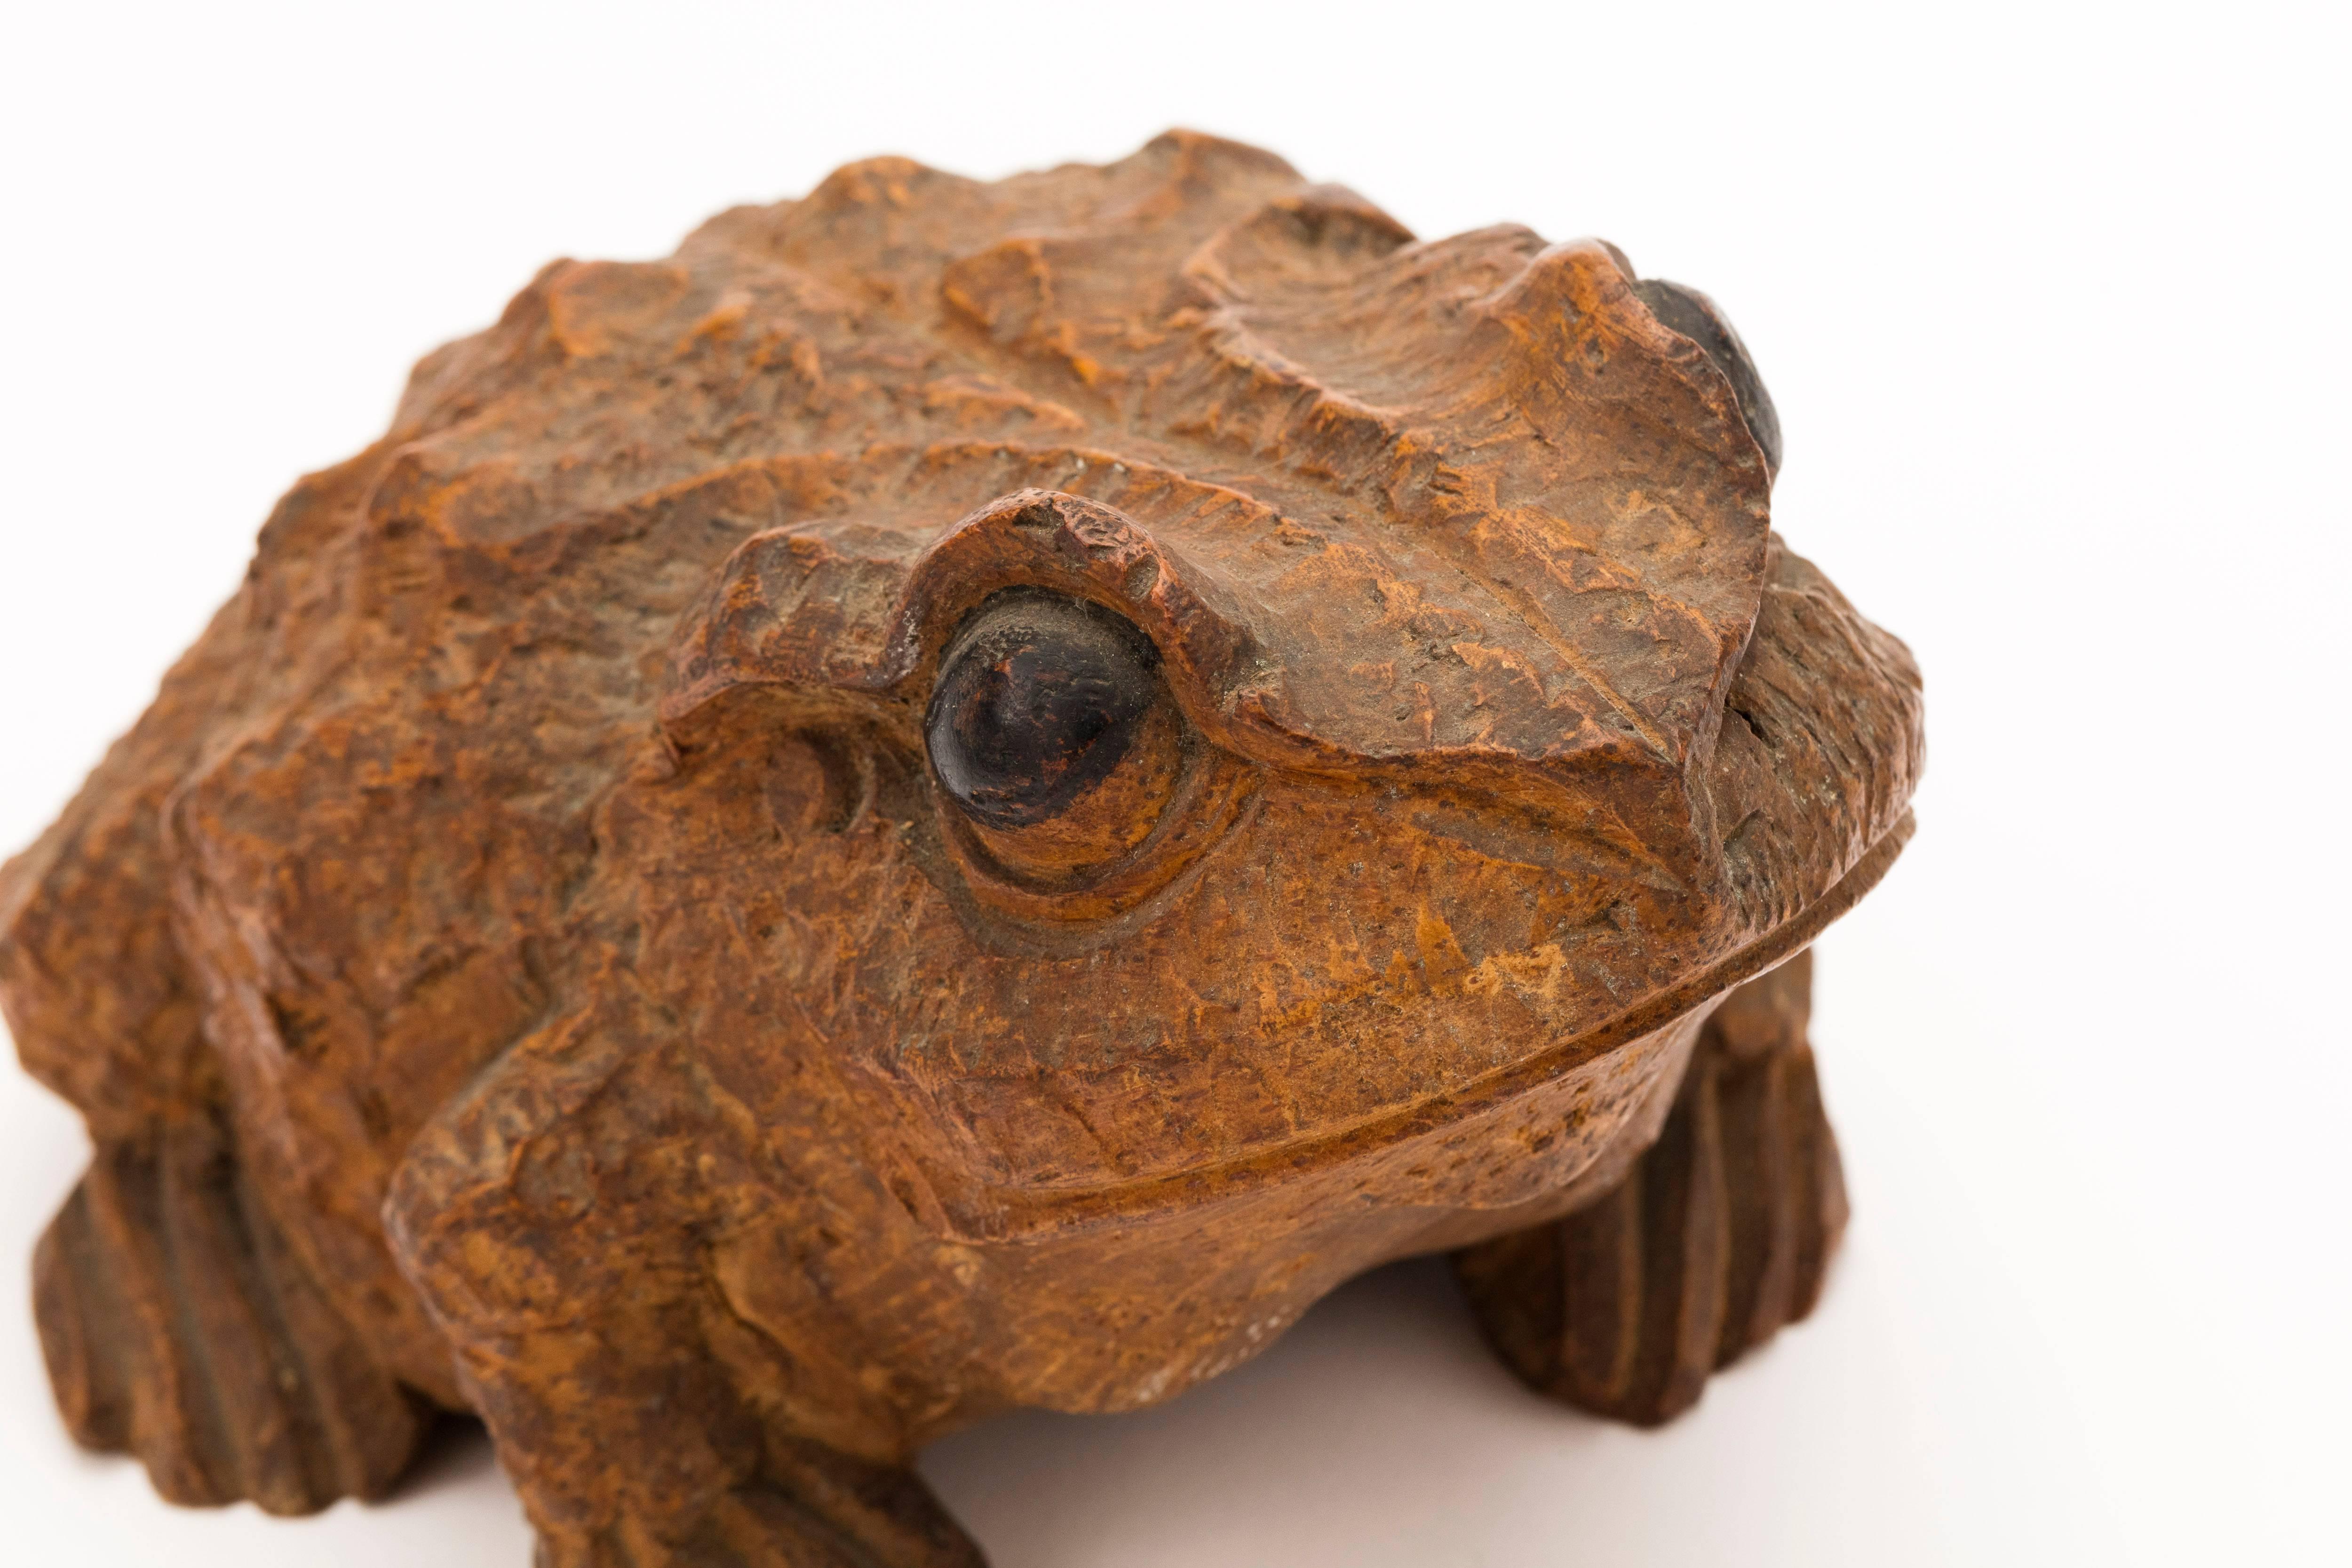 Antique Japanese bamboo toad, 19th century, Meiji period, hand carved with glass eyes.

Dimensions: H 10.5cm x W 19cm x D 15cm